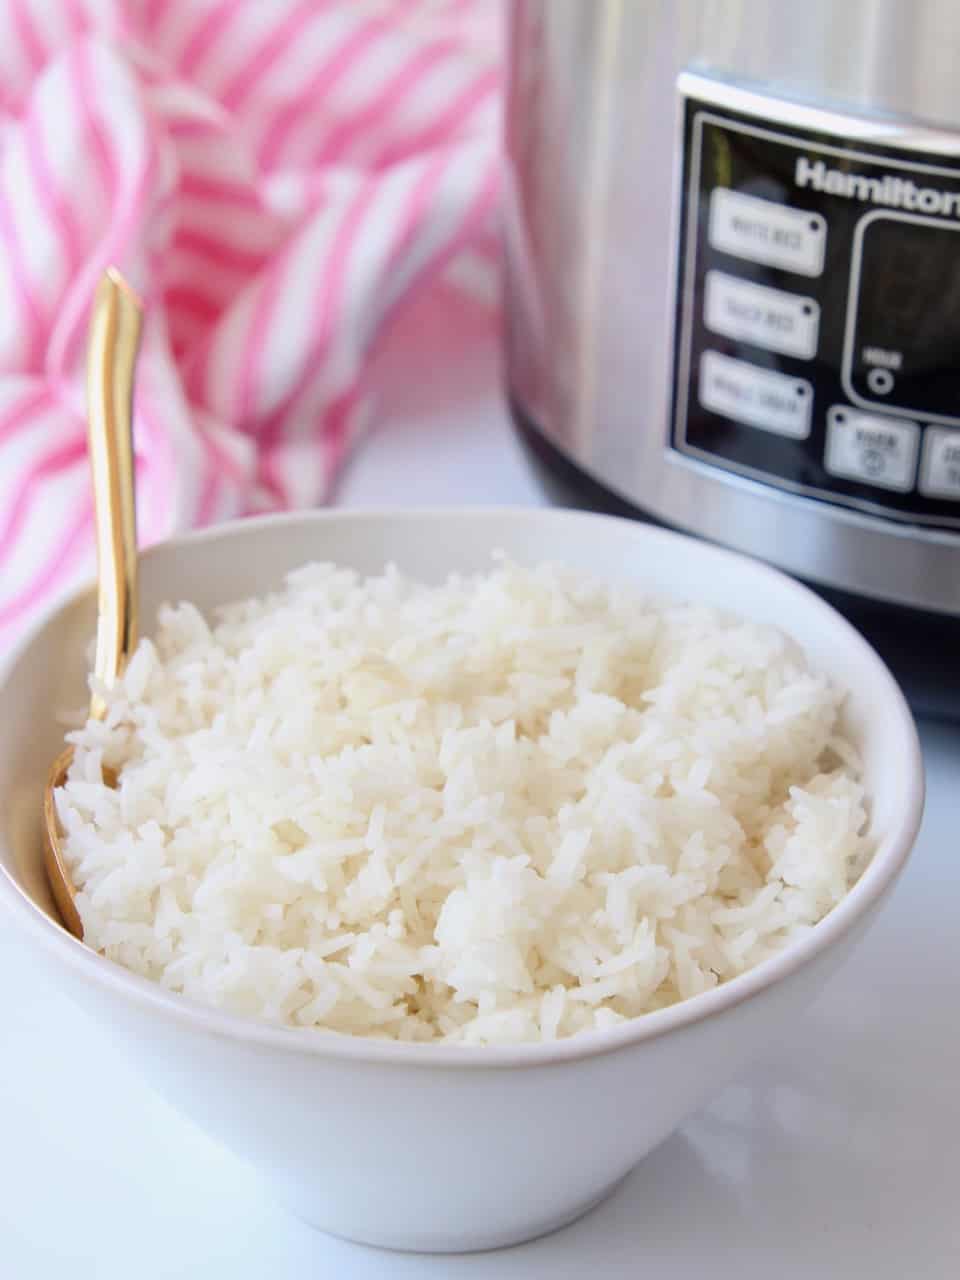 How To Cook White Rice 3 Ways - Bowls Are The New Plates